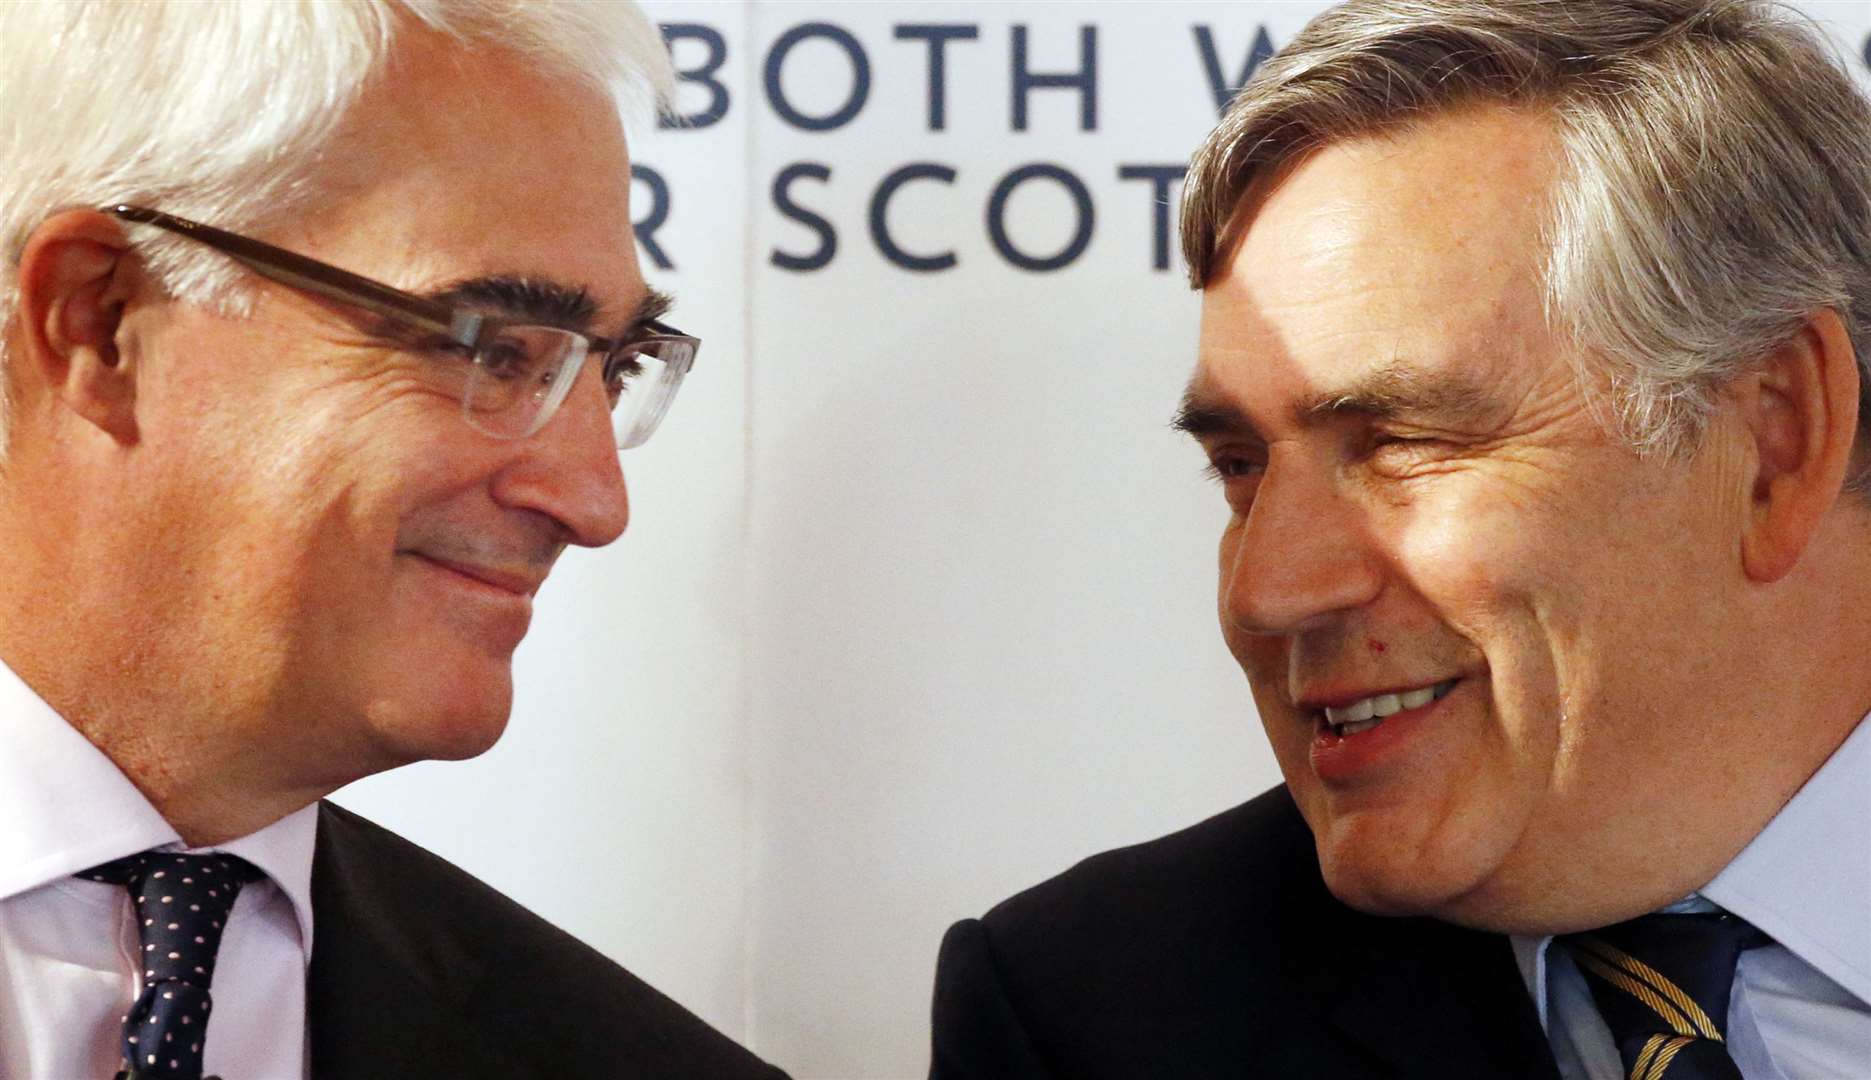 Alistair Darling and Gordon Brown worked closely together during the 2014 independence referendum (PA Archive)